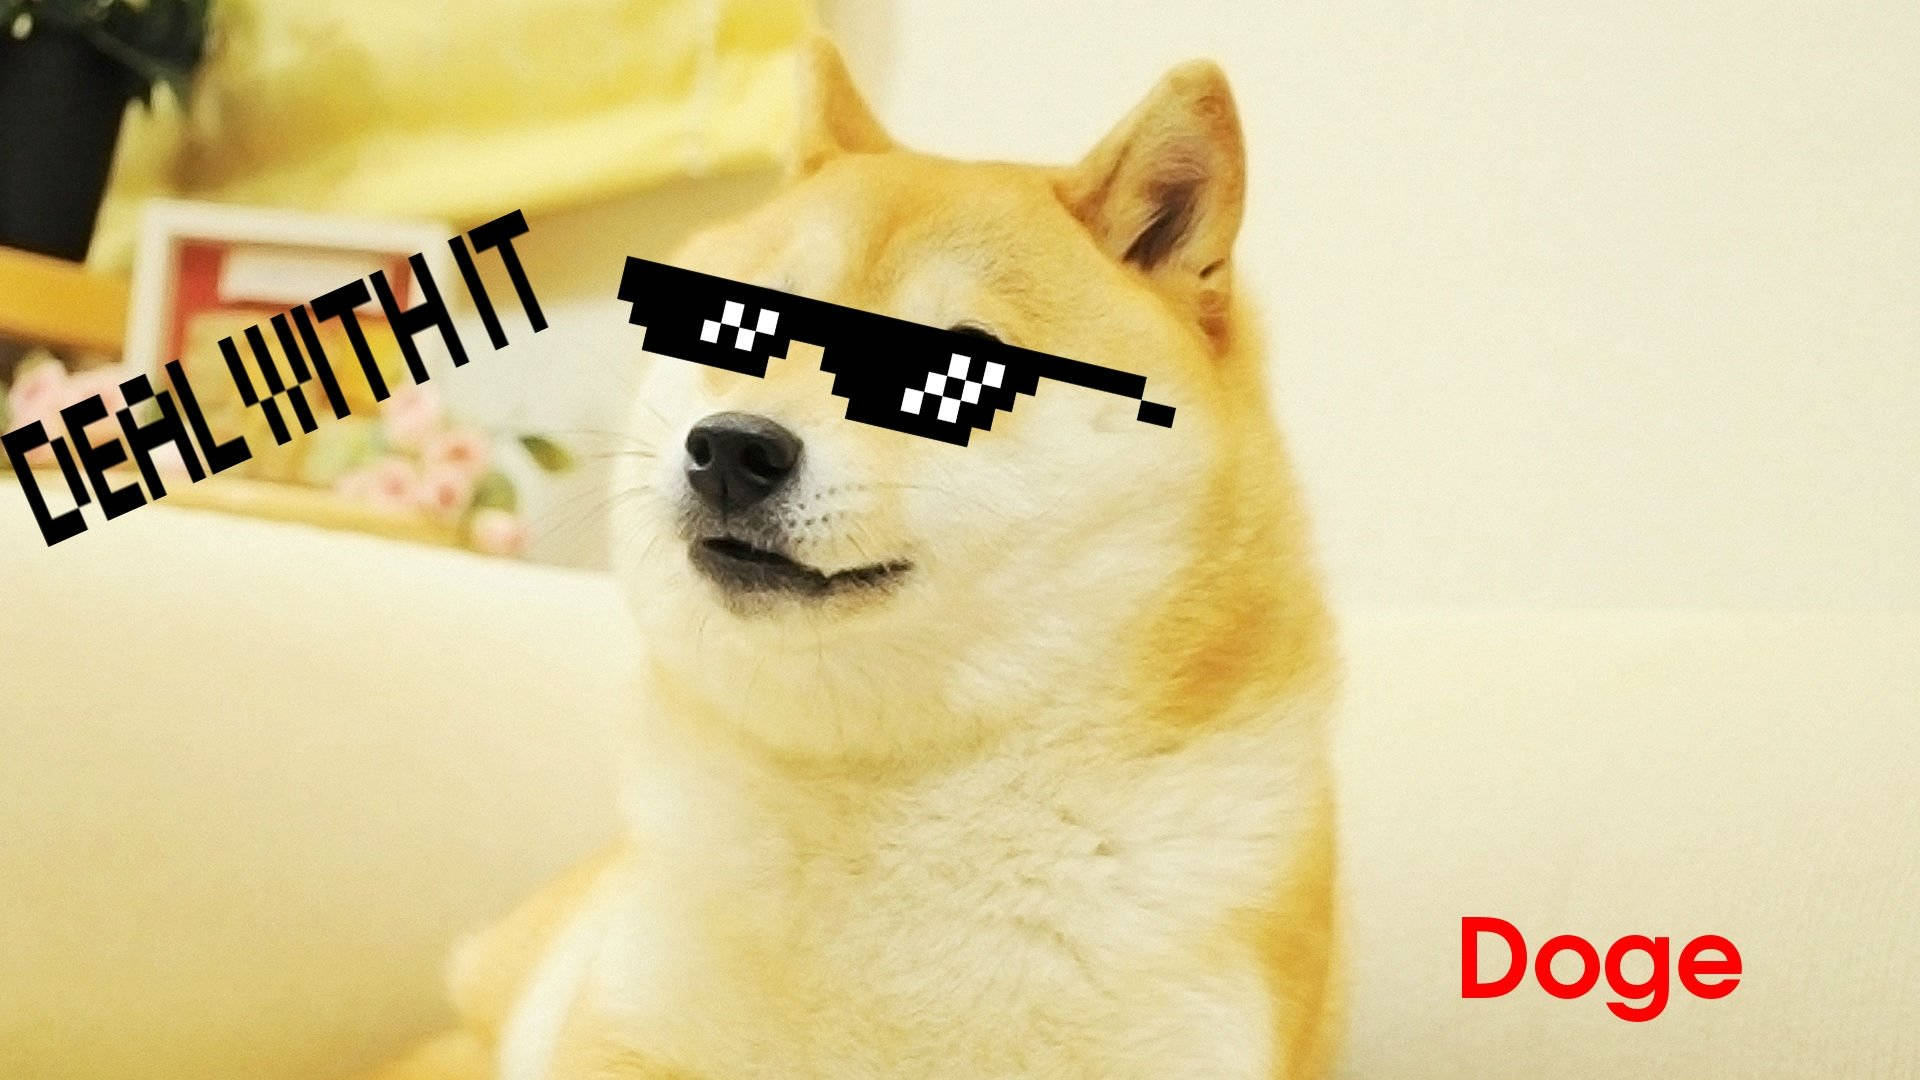 Deal With It Doge Meme